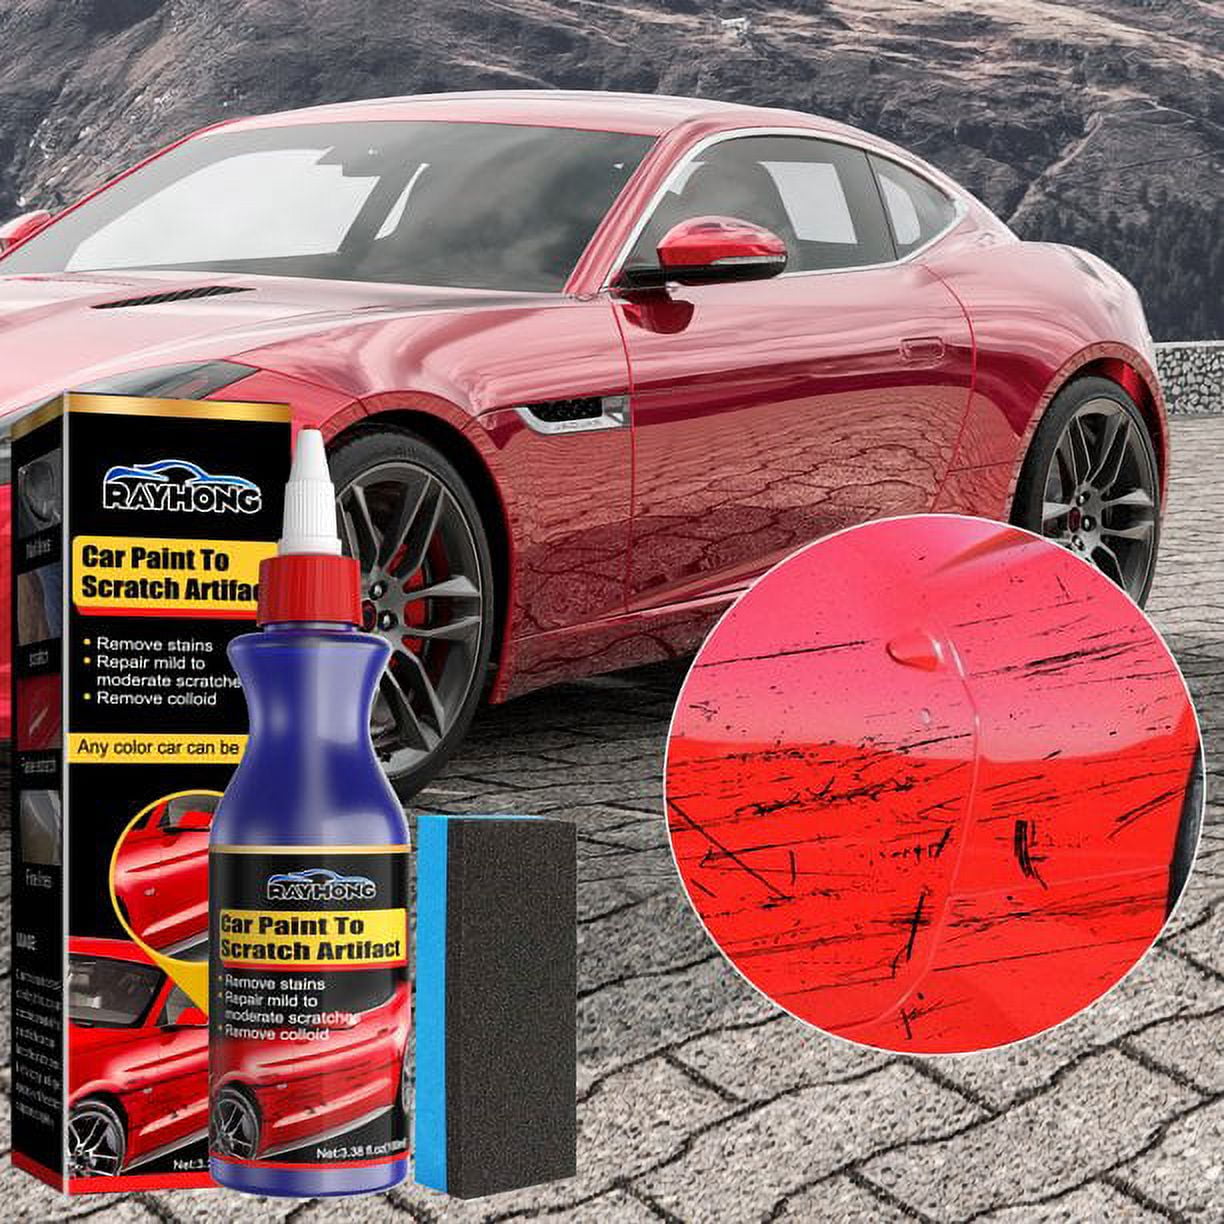 UIRPK Ultimate Paint Restorer,Car Paint to Scratch Artifact,f1 CC Scratch  Remover,Ultimate Paint Restorer,Easily Fix Any Scratches, Swirls, or Other